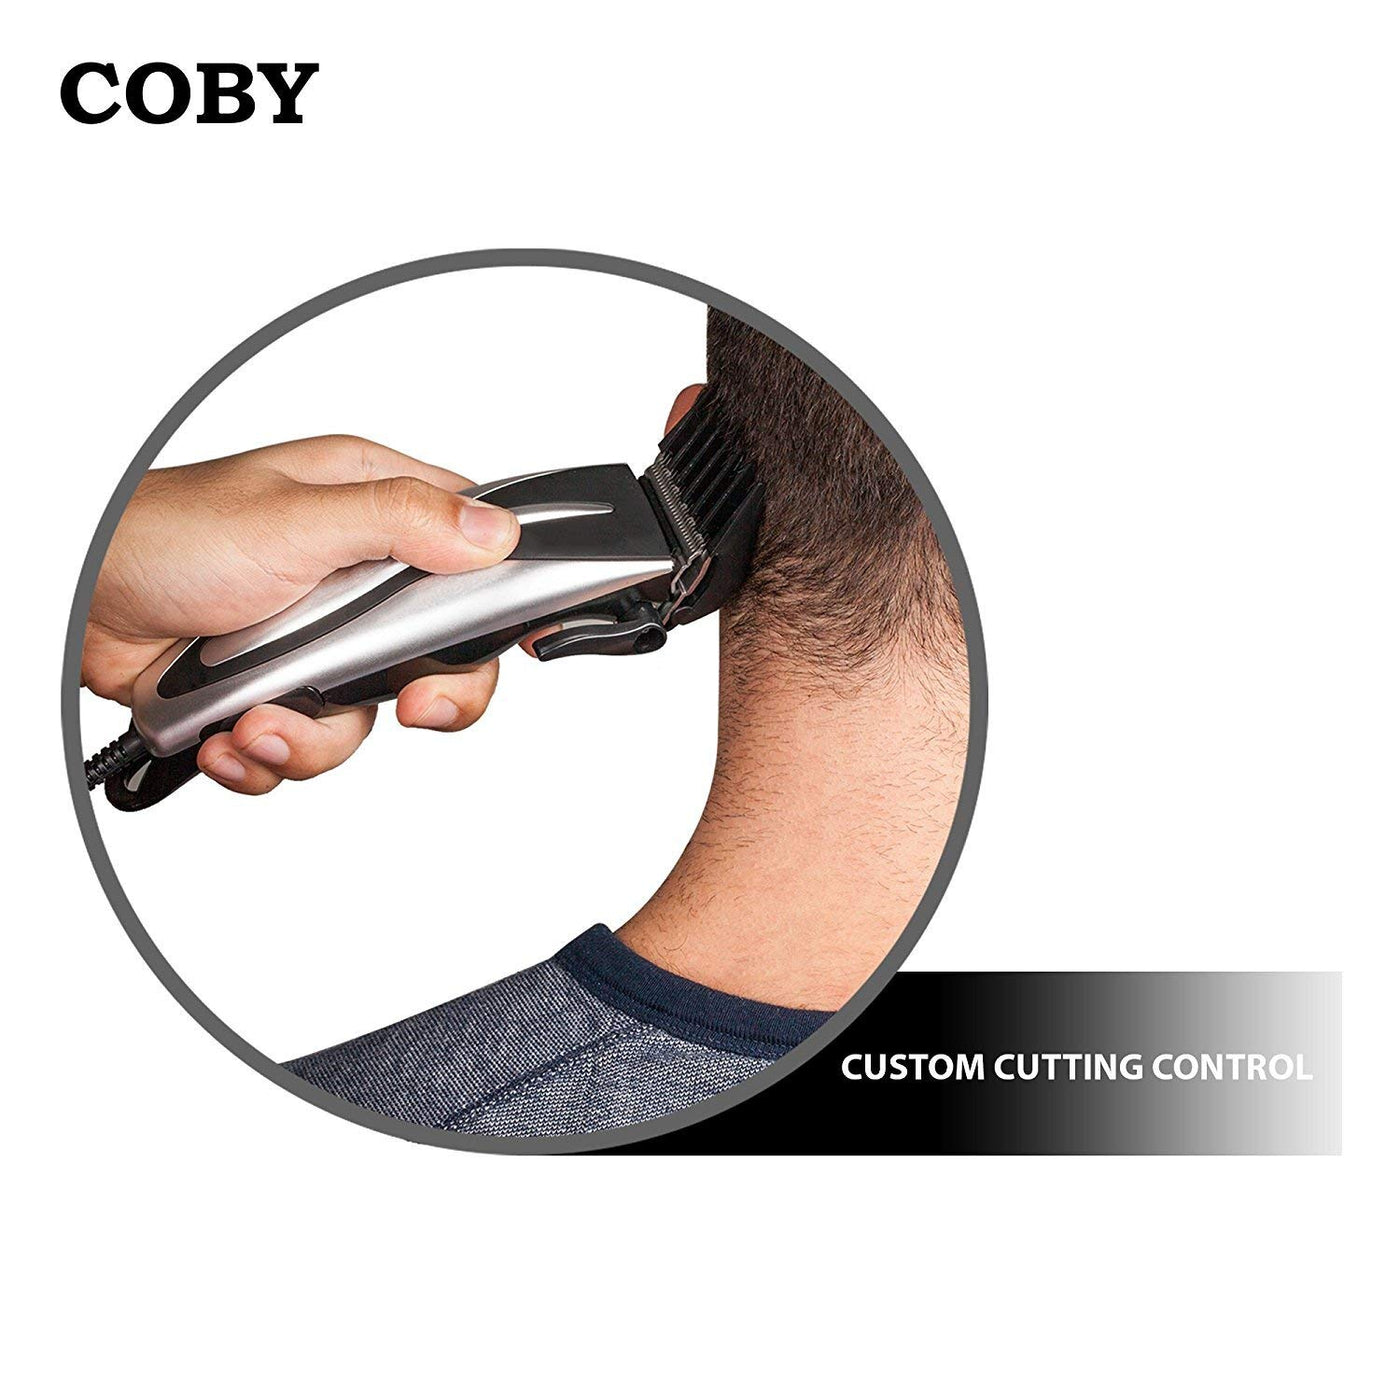 coby supreme home hair cutting kit